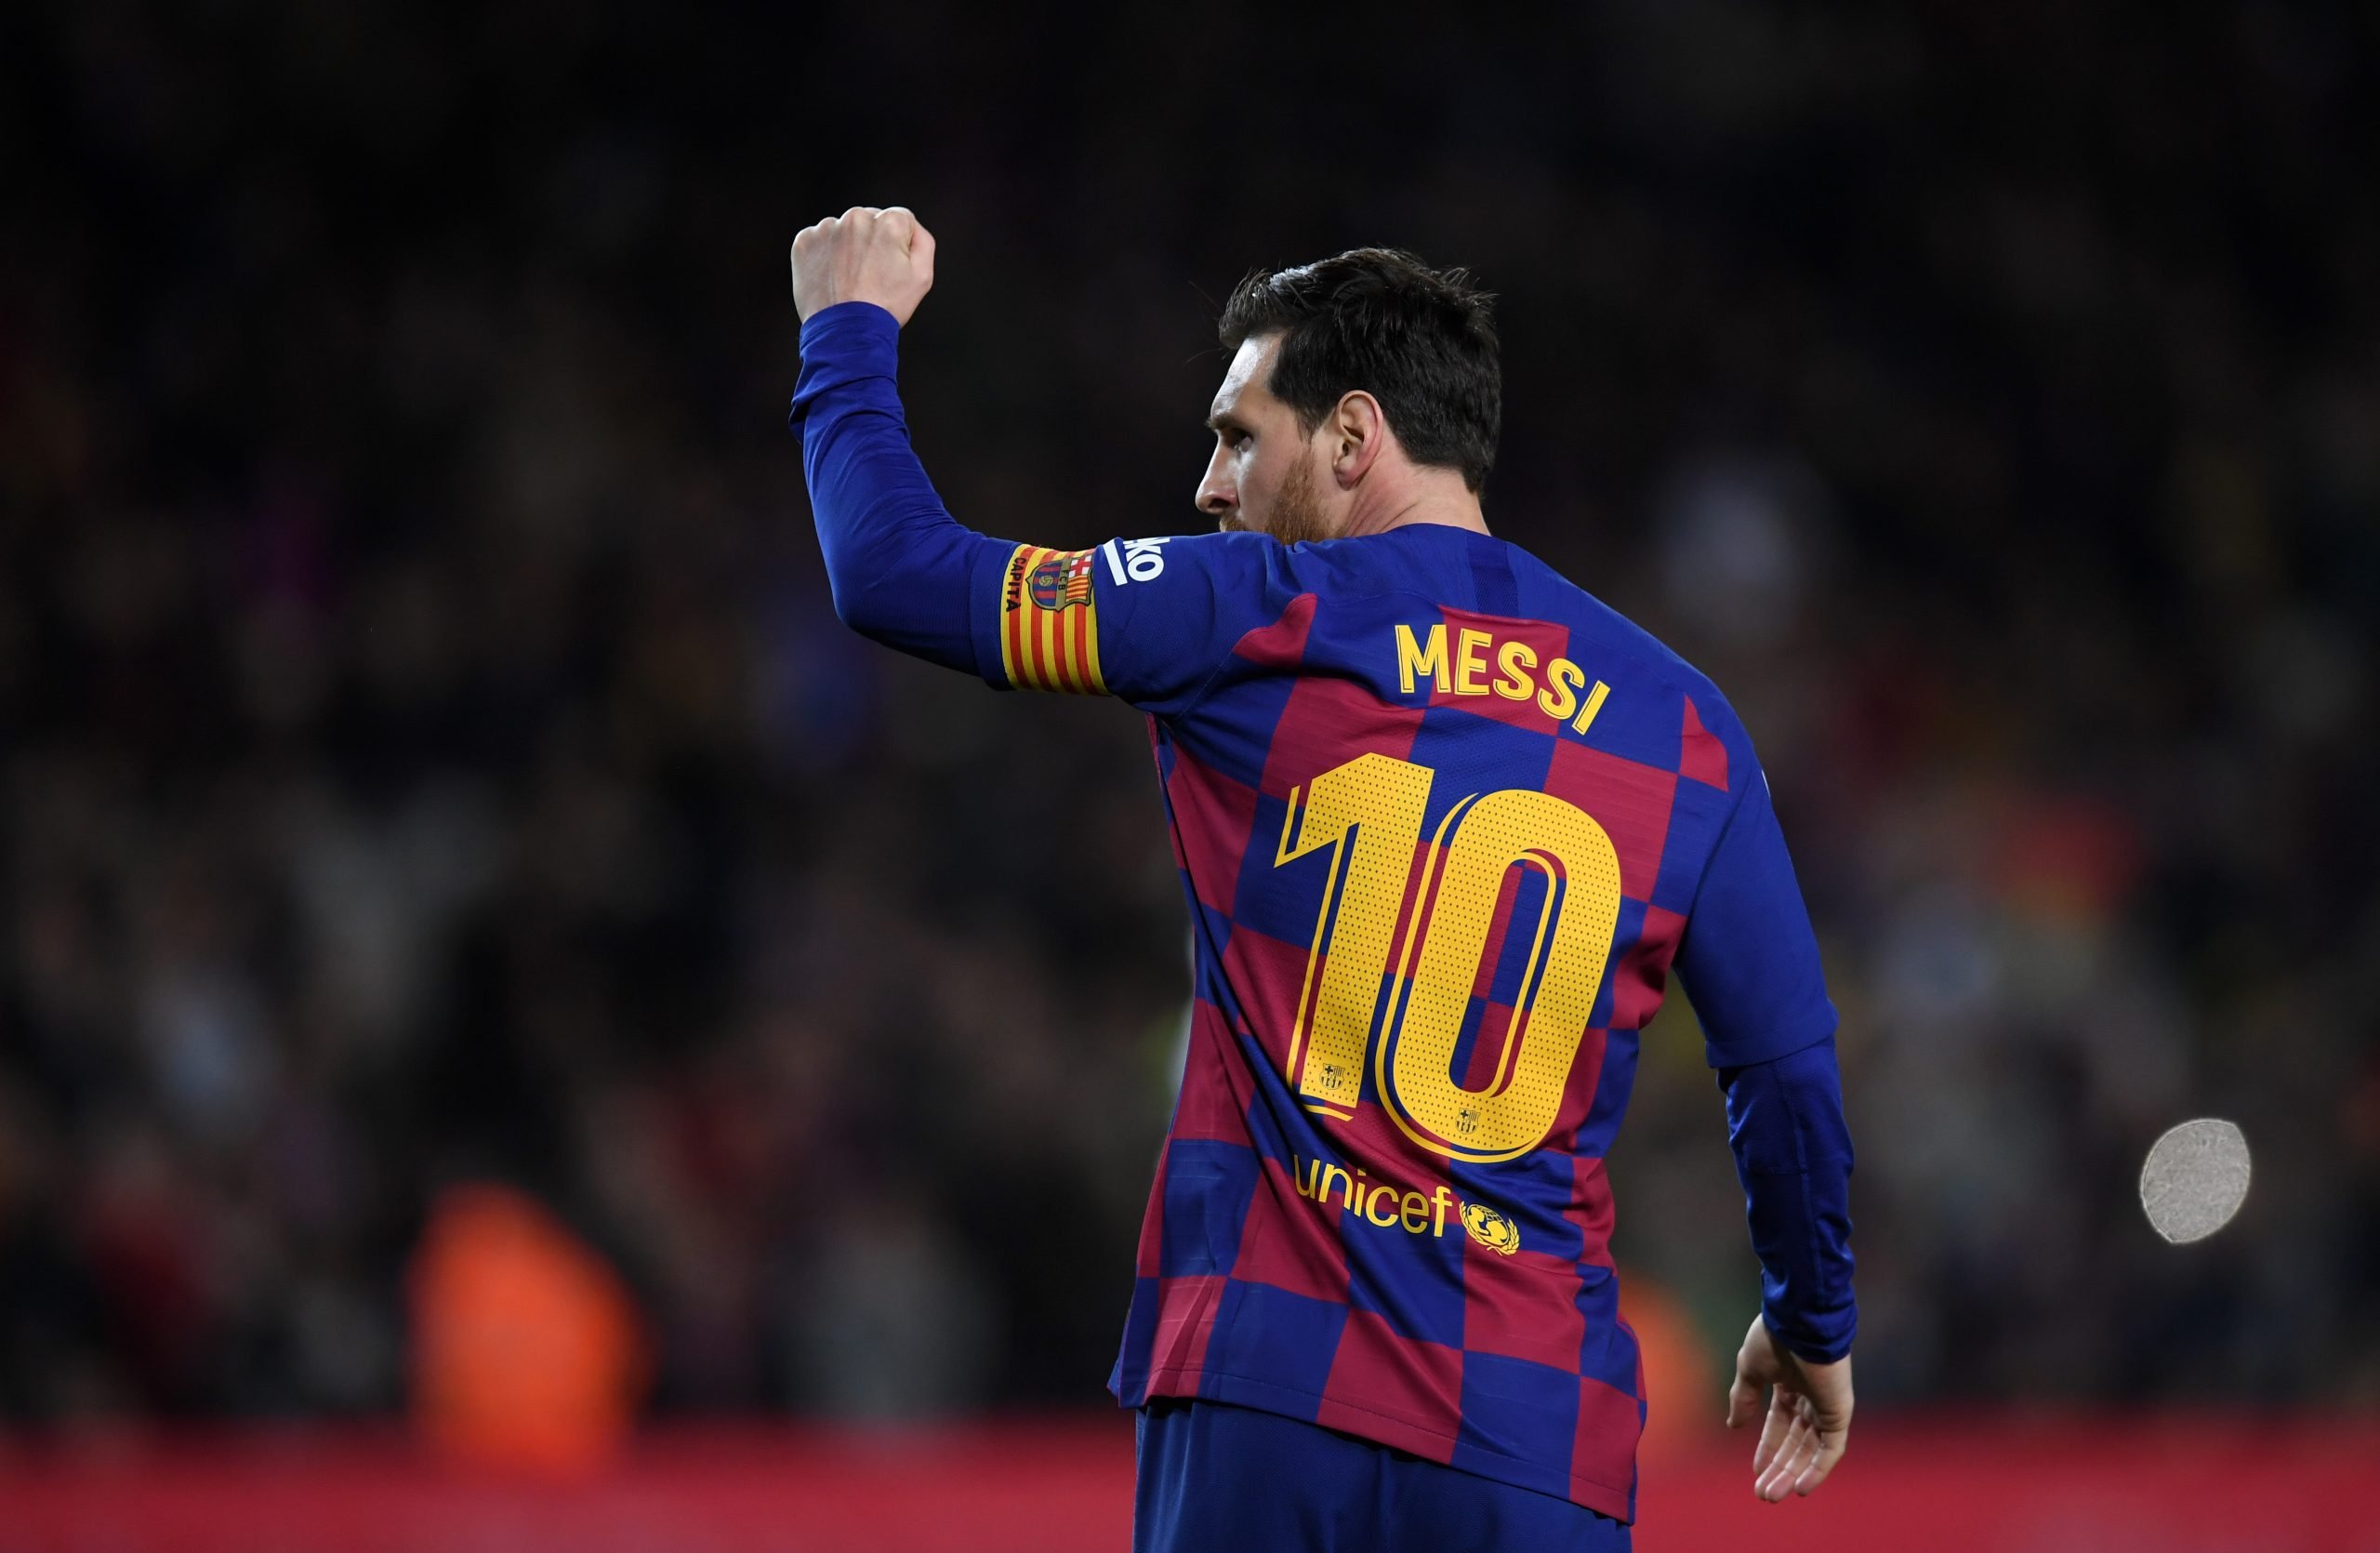 BARCELONA, SPAIN - MARCH 07: Lionel Messi of FC Barcelona celebrates after scoring his team's first goal  during the La Liga match between FC Barcelona and Real Sociedad at Camp Nou on March 07, 2020 in Barcelona, Spain. (Photo by Alex Caparros/Getty Images)